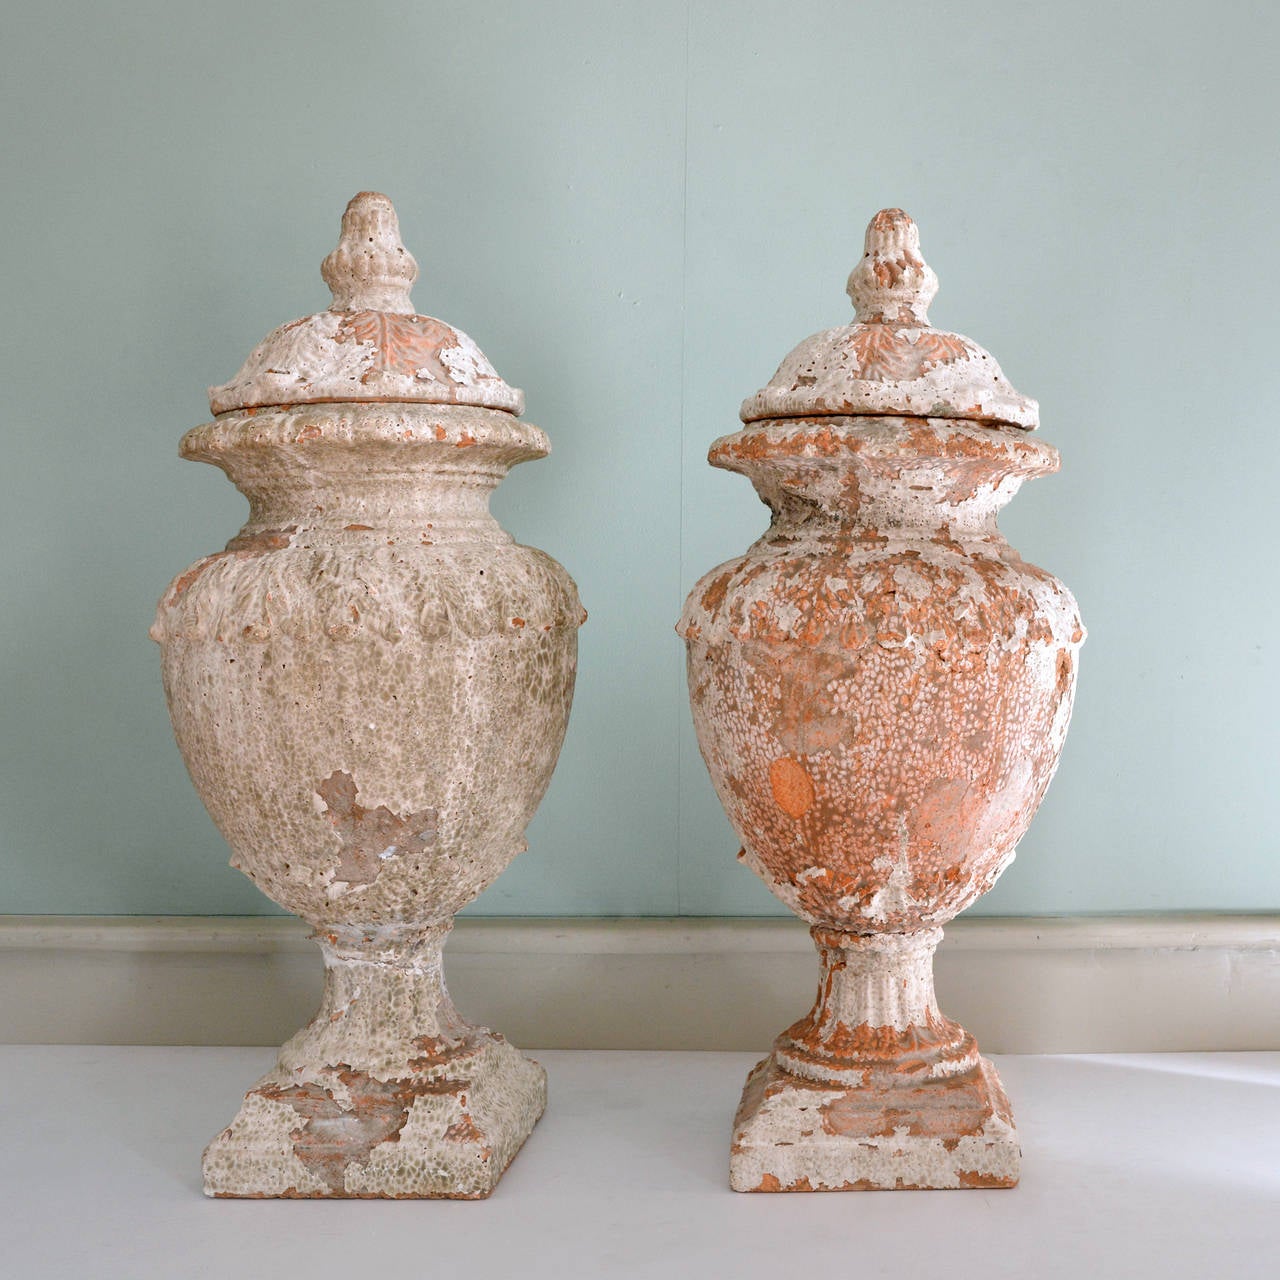 A pair of Italianate terracotta lidded urns, the lids and bulbous bodies decorated with stiff leaf motif, the waisted socle on square plinth base. Distressed majolica glaze all over, one urn repaired (socle).

Available to view at Brunswick House,